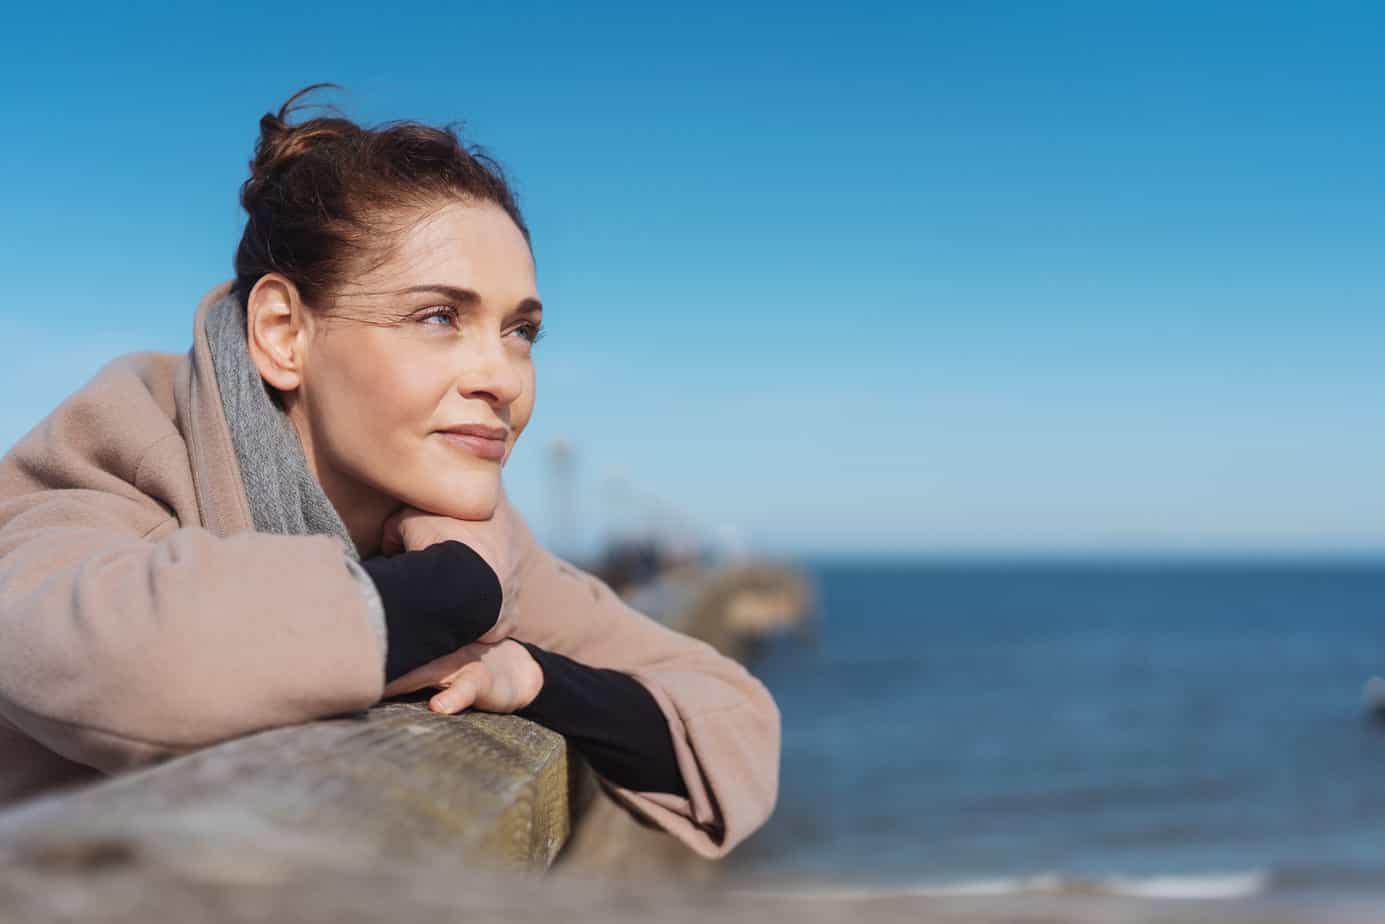 woman staring off into the ocean moving on from regret and looking hopeful